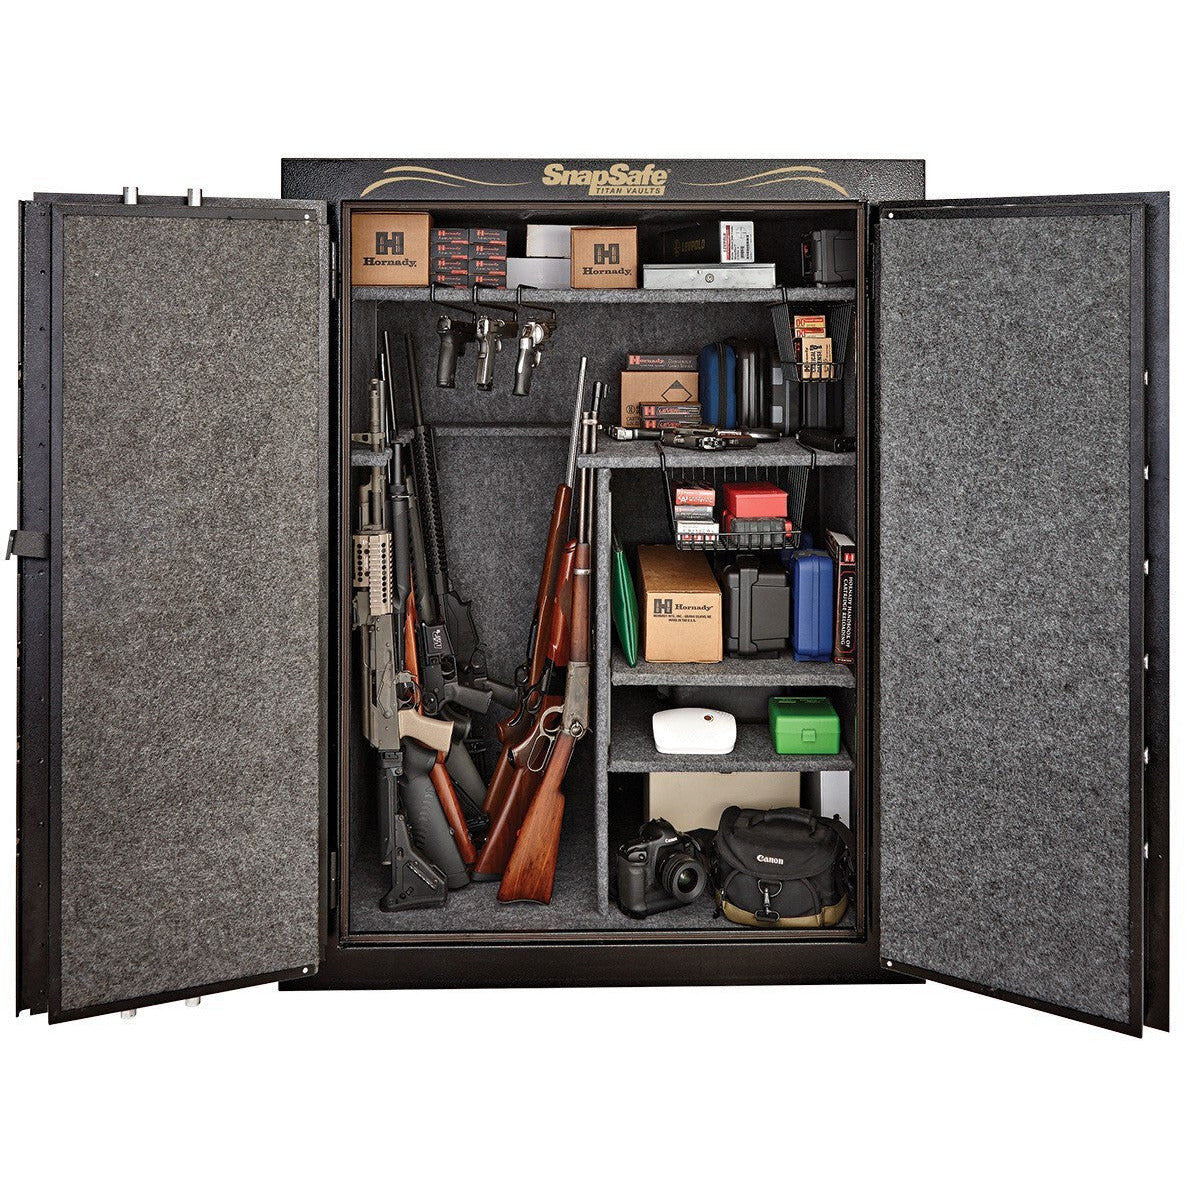 Gun Safes Sale on Black Friday: Smart Shopping for Top Security